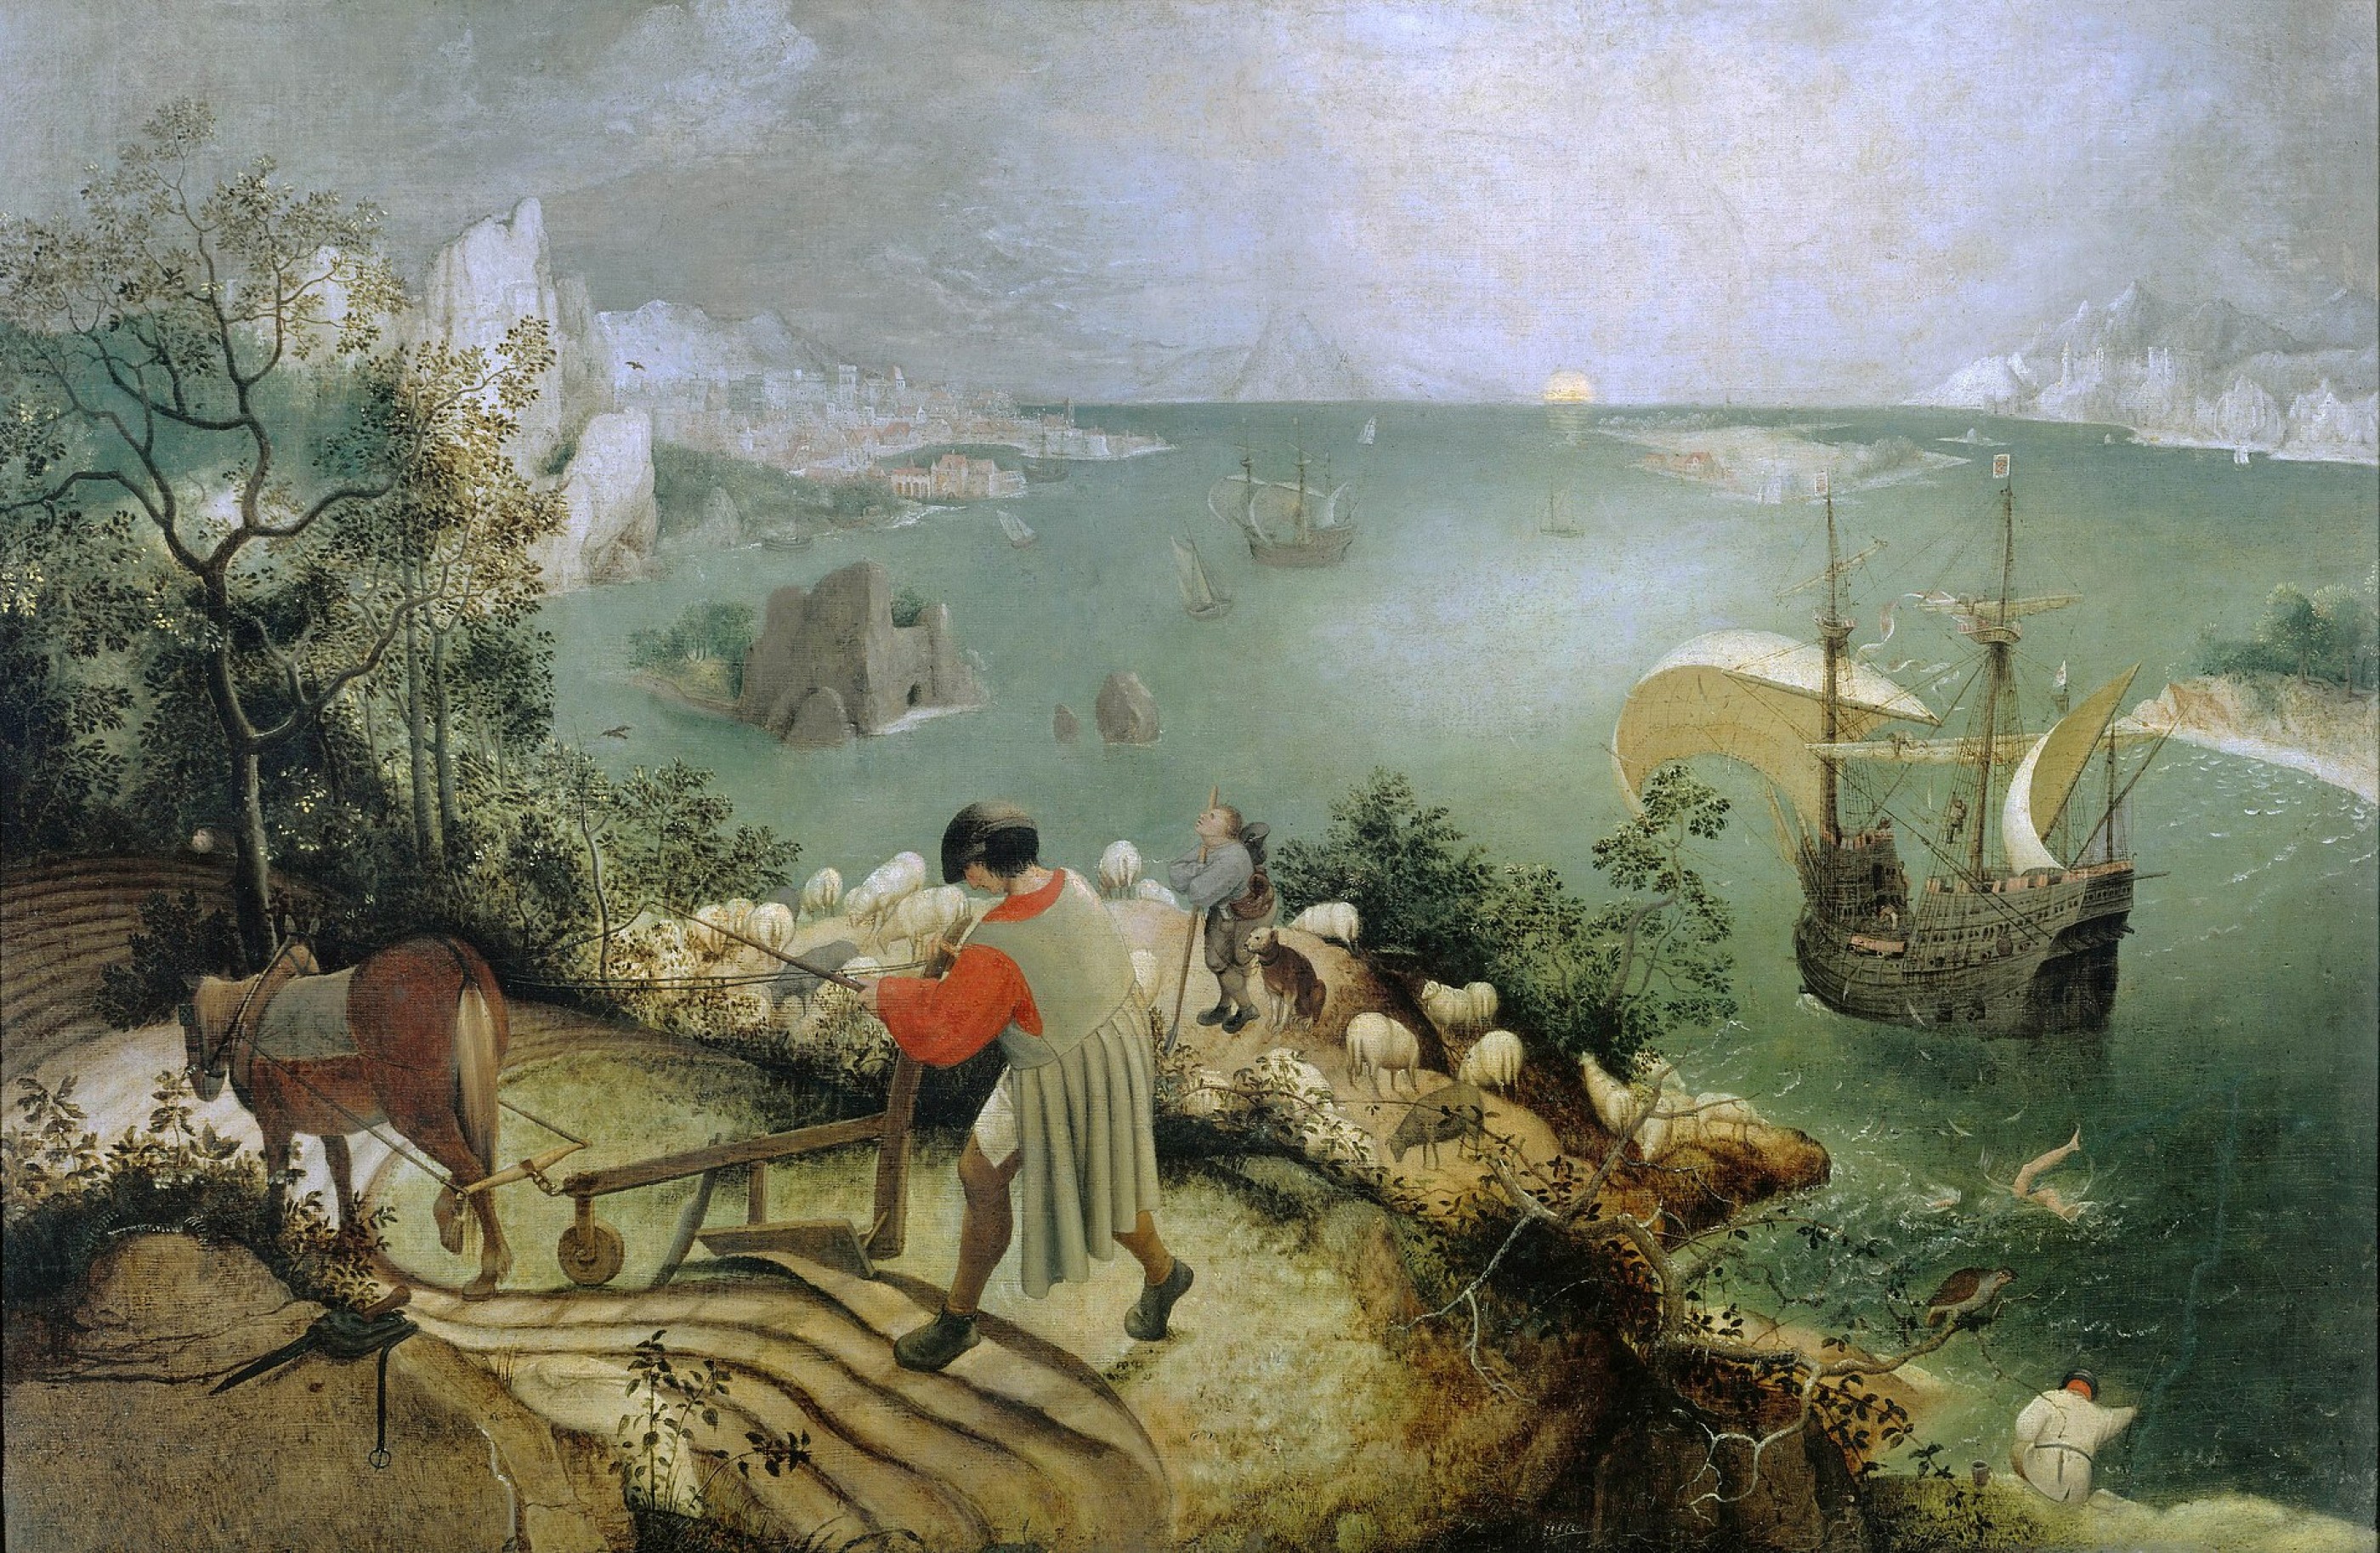 Fig. 17: Pieter Brueghel the Elder (presumed), “Landscape with the Fall of Icarus,” Musée des Beaux Arts, c. 1550s